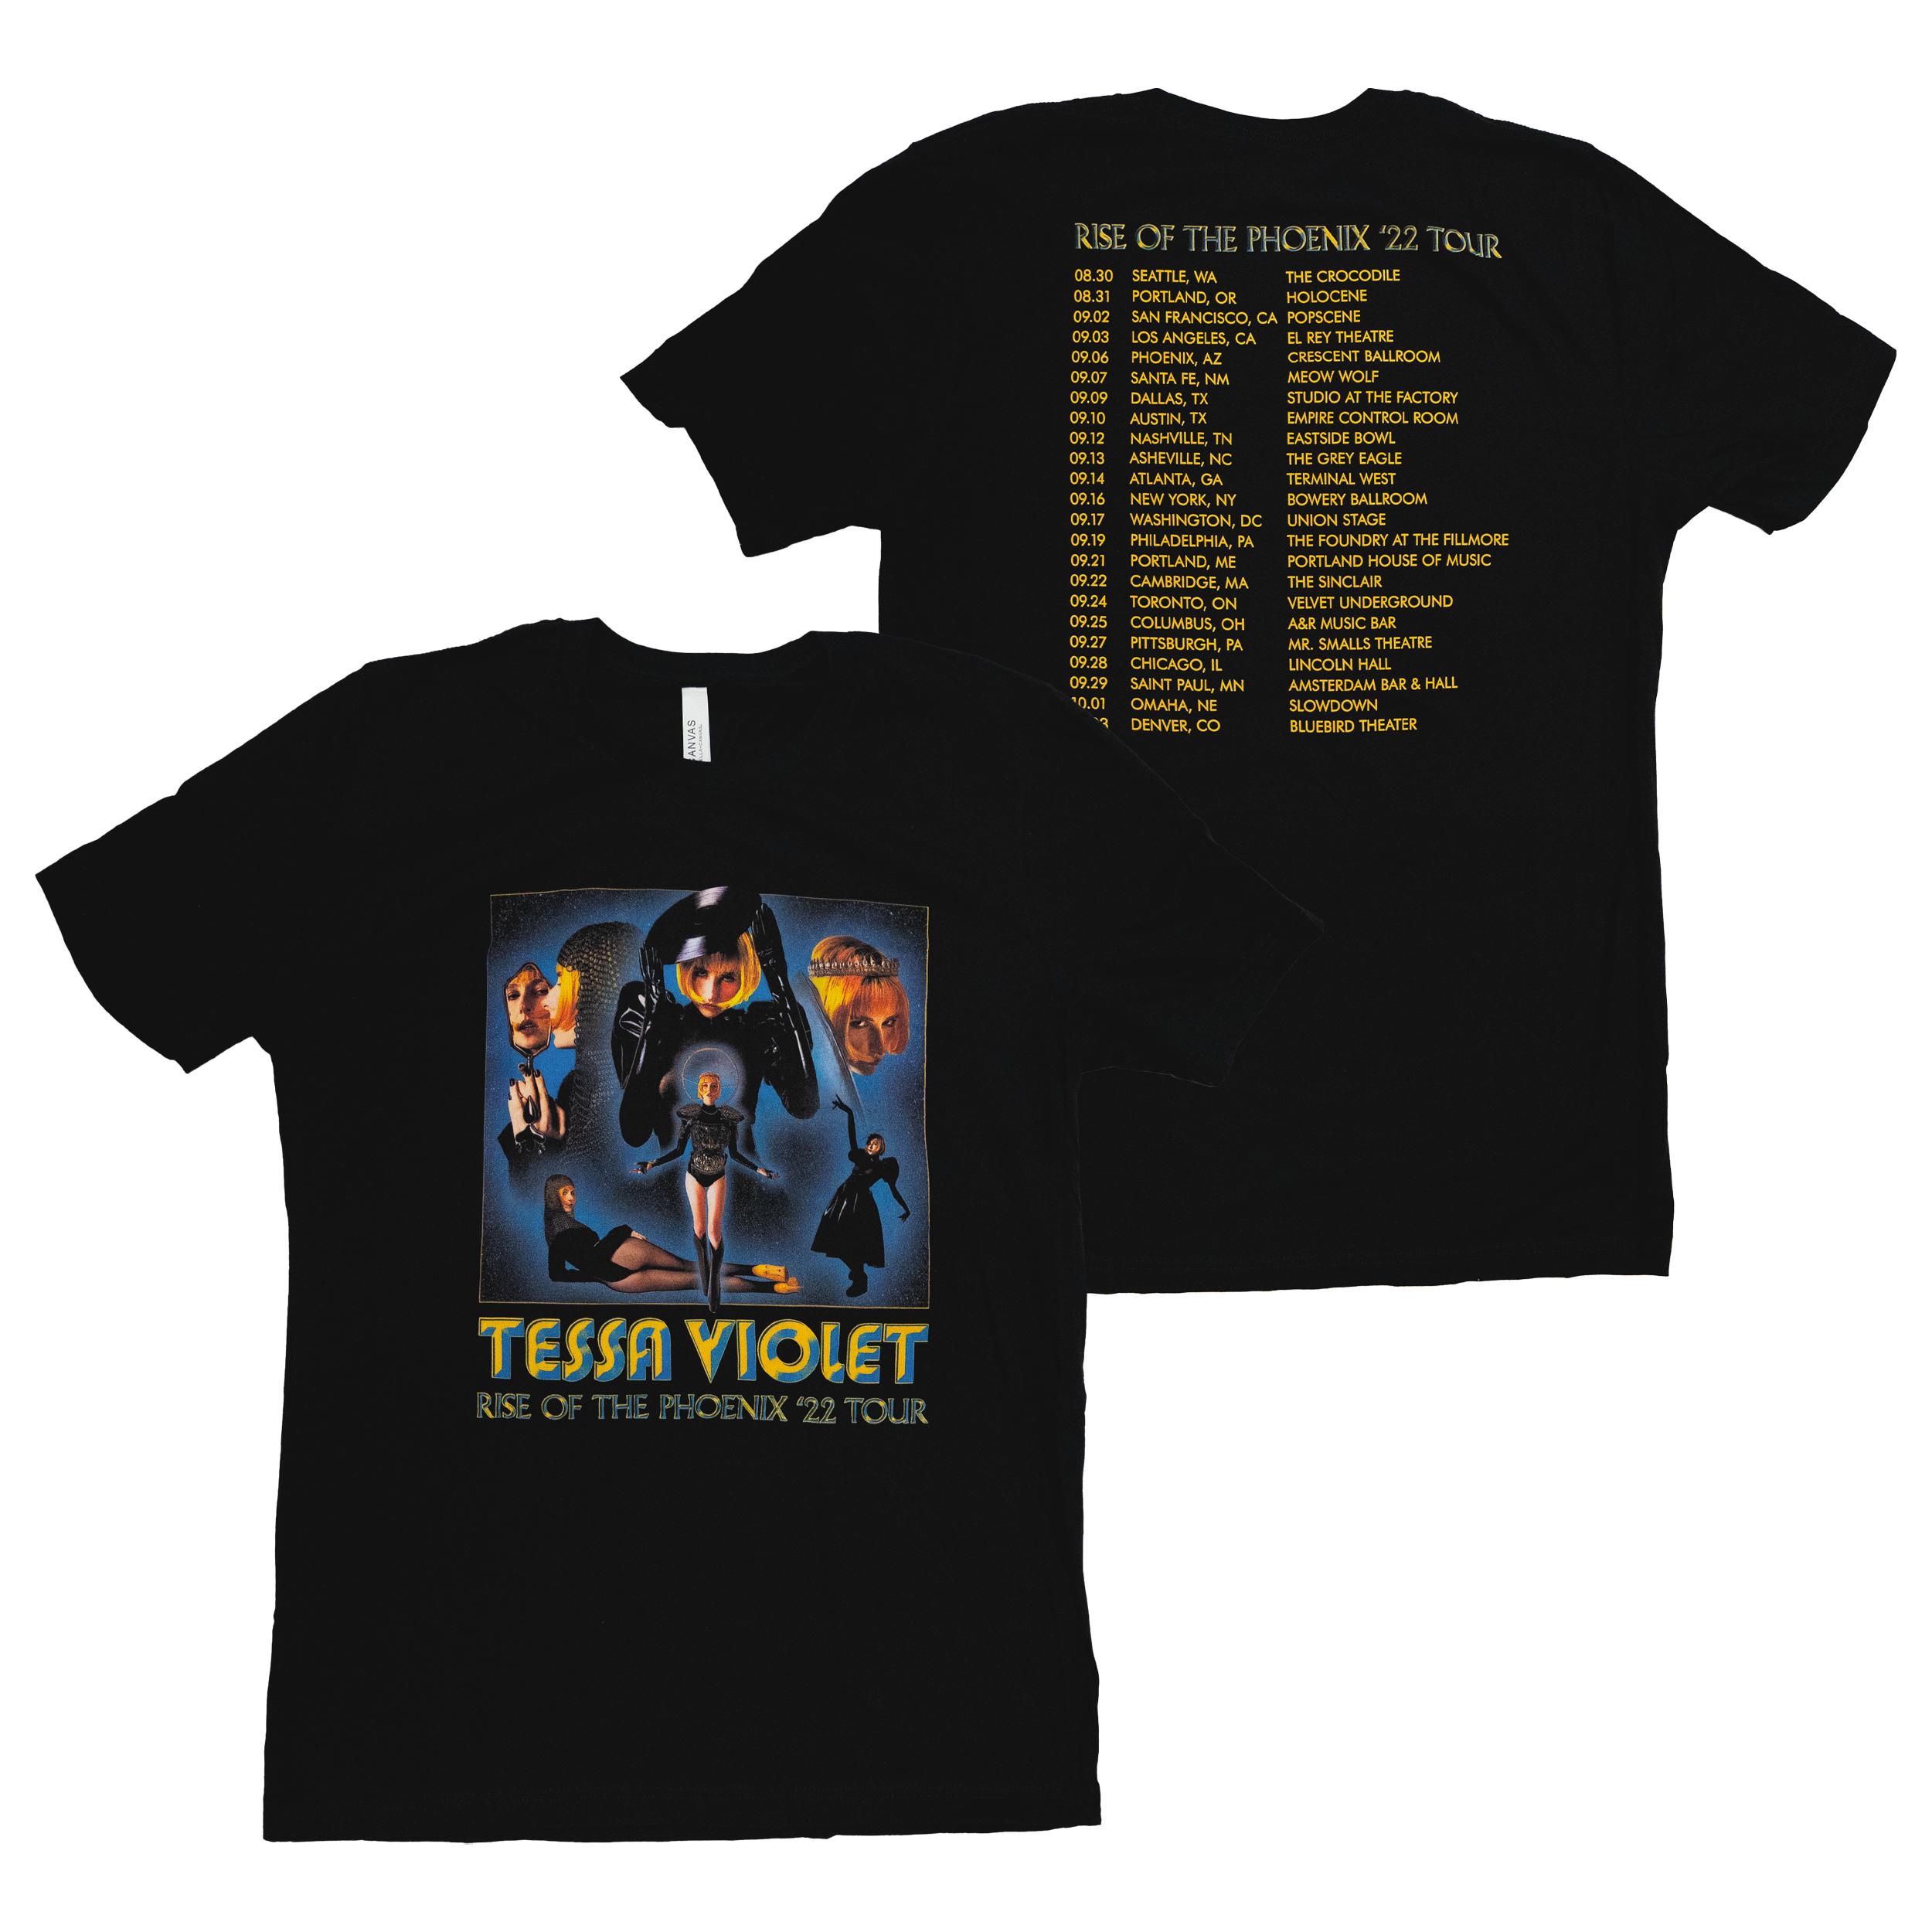 RISE OF THE PHOENIX TOUR TEE